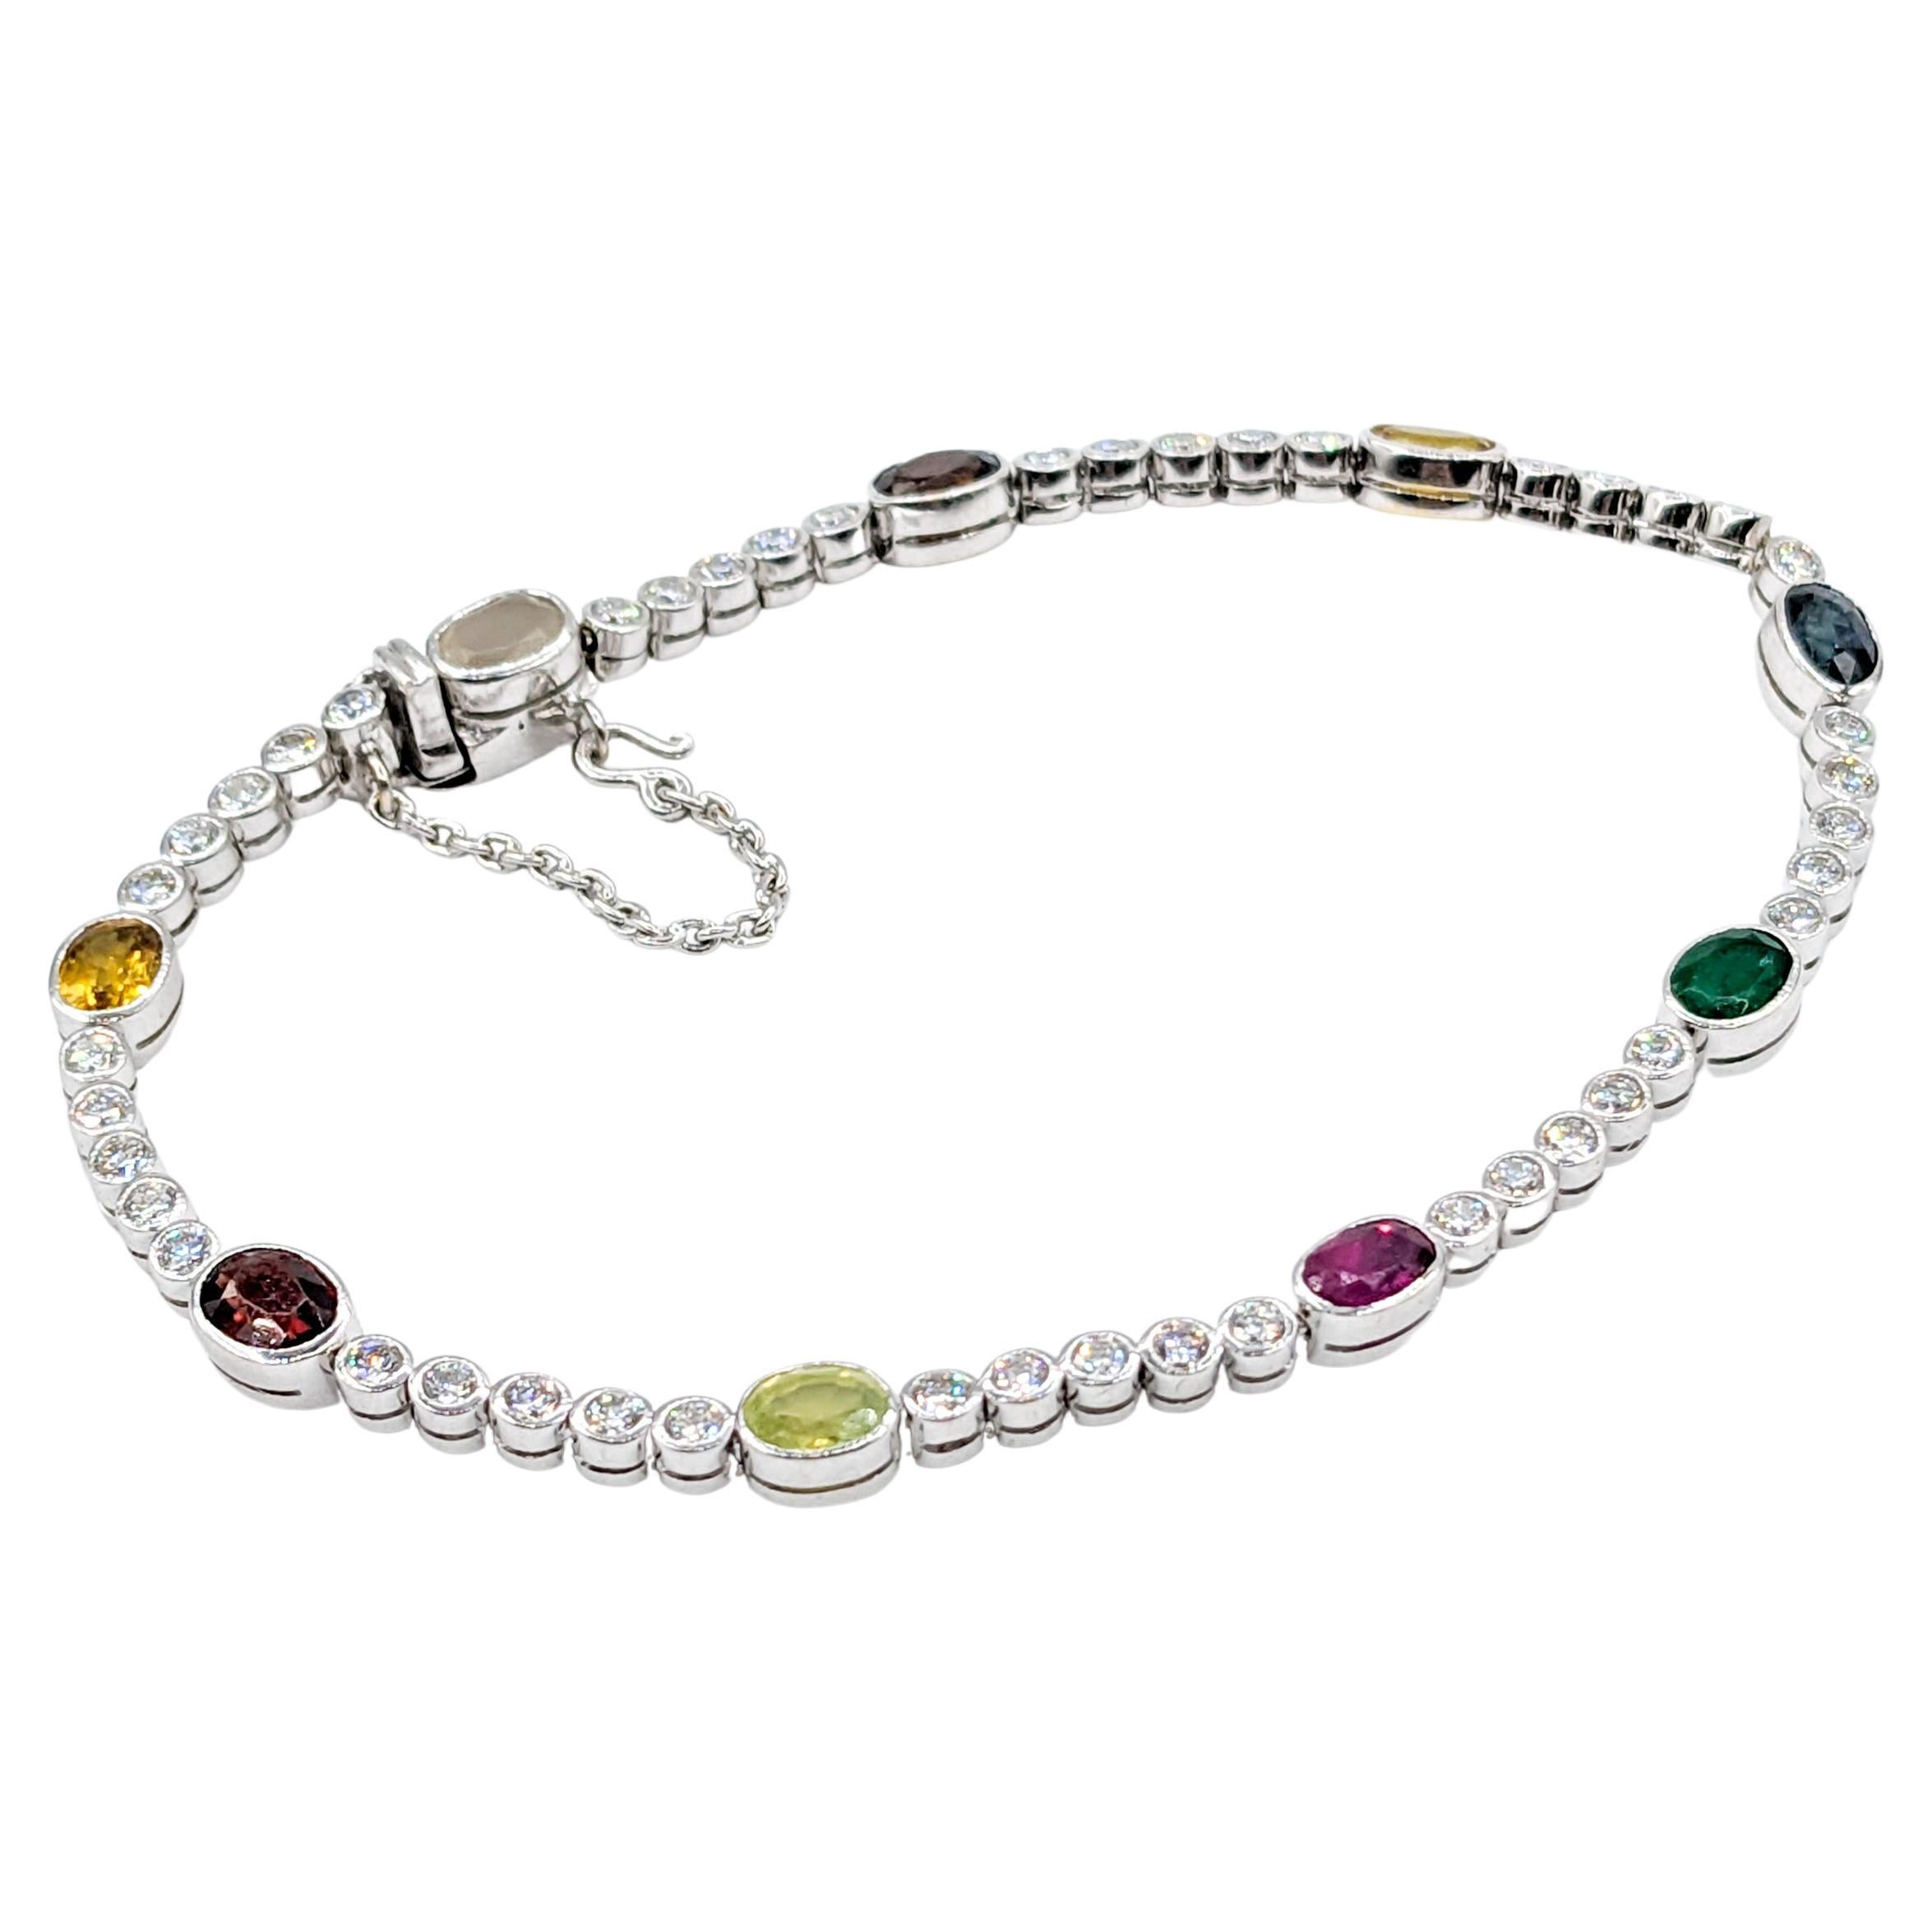 Multi Color Gemstone - Sapphire, Ruby, Moonstone, Quartz, Emerald Bracelet

Discover the epitome of elegance with this stunning bracelet, meticulously crafted from 18kw white gold. Encrusted with 1.35ctw of round diamonds, this piece radiates an